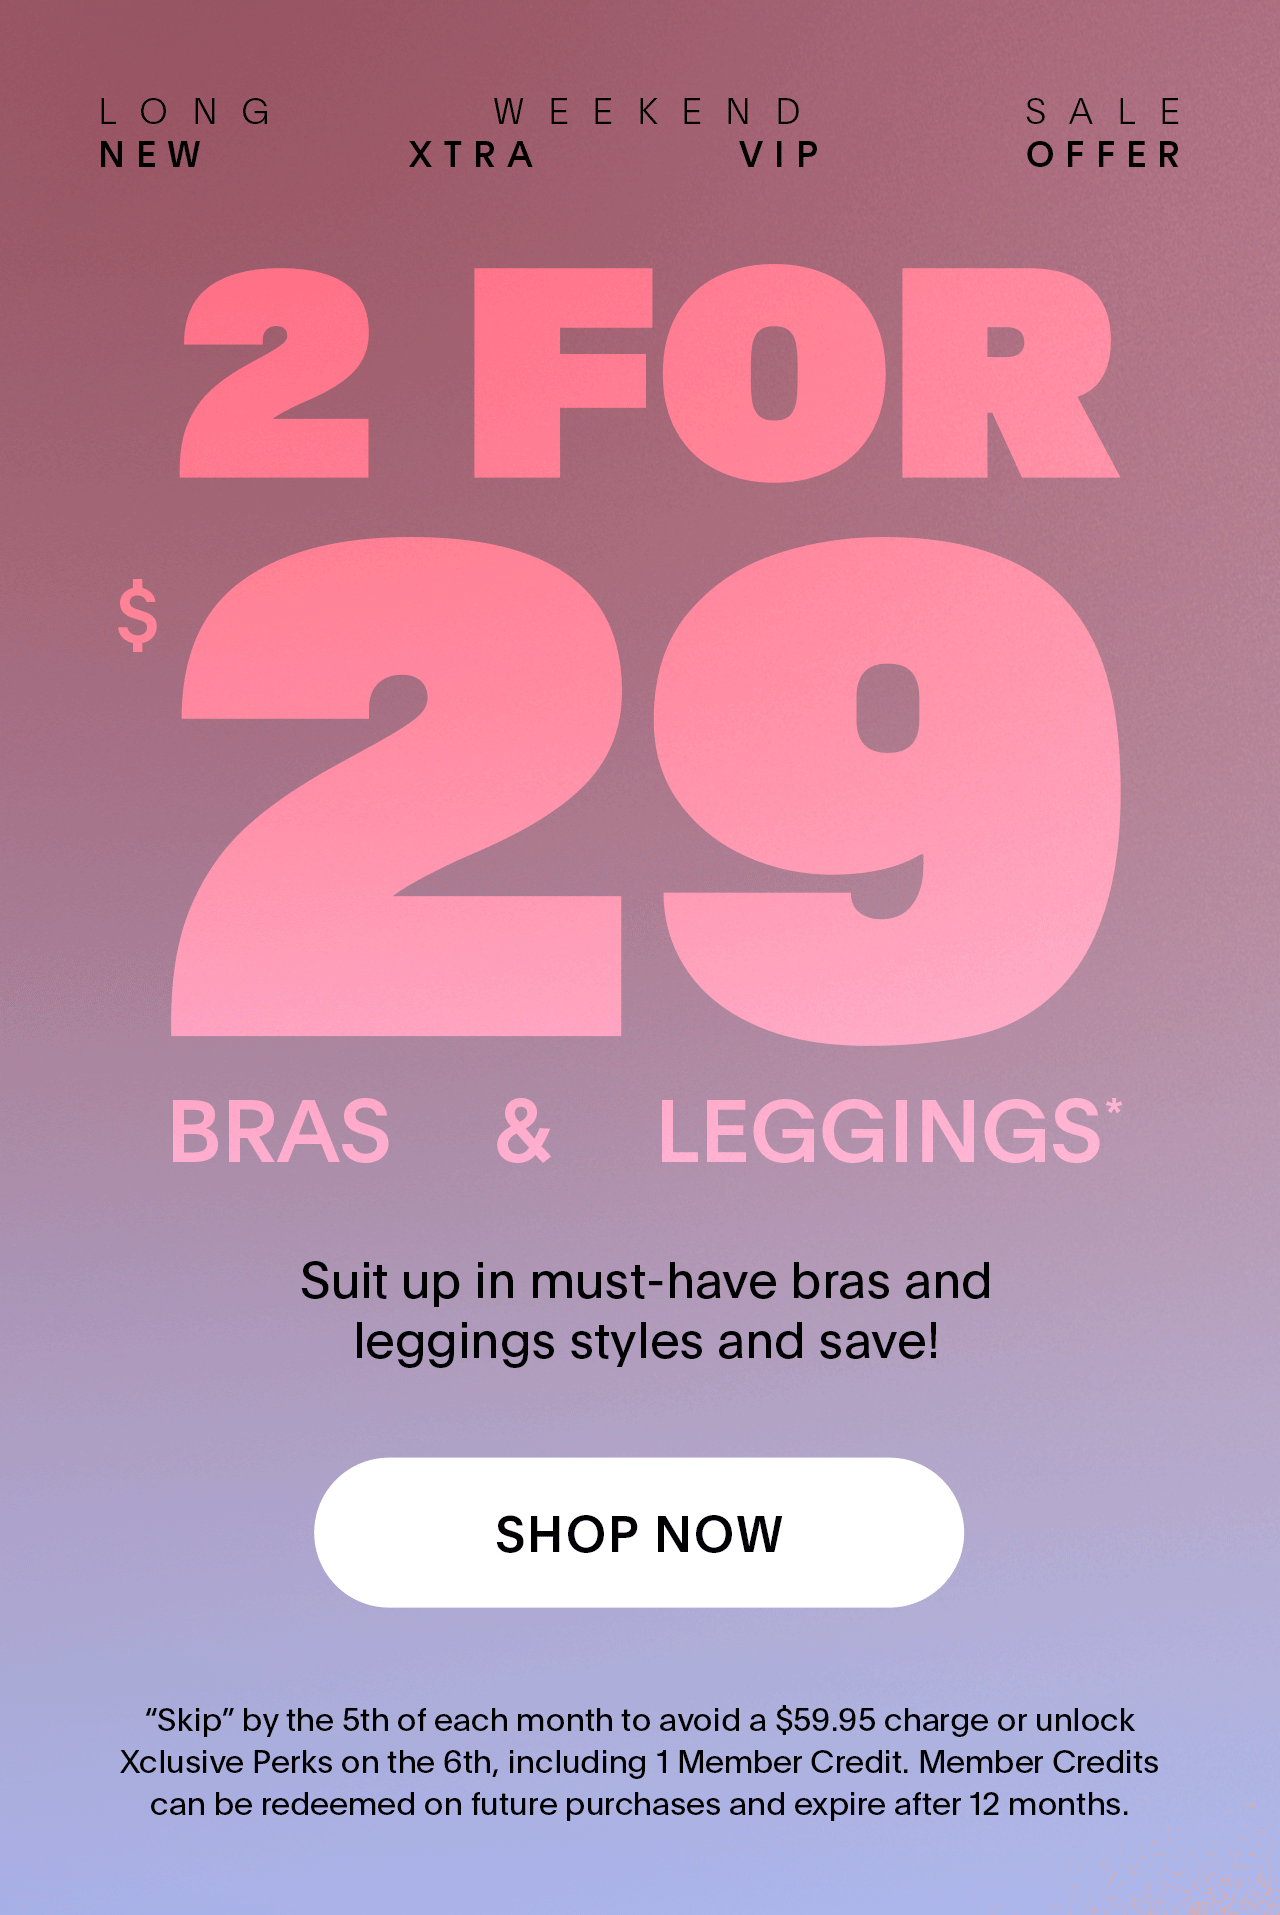 Long Weekend Sale New Xtra VIP Offer 2 for \\$29 Bras & Leggings* 